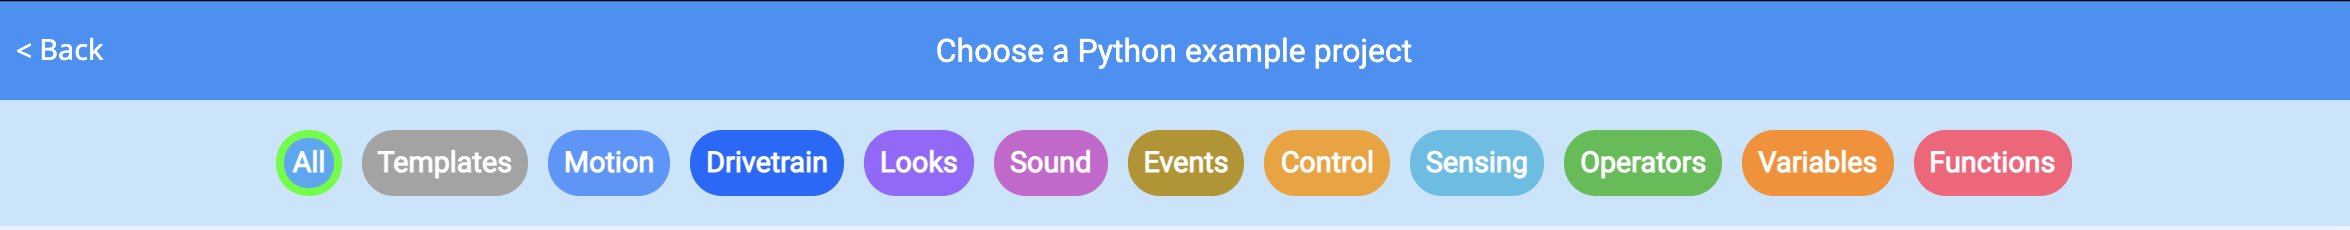 choose_python_example_project.png